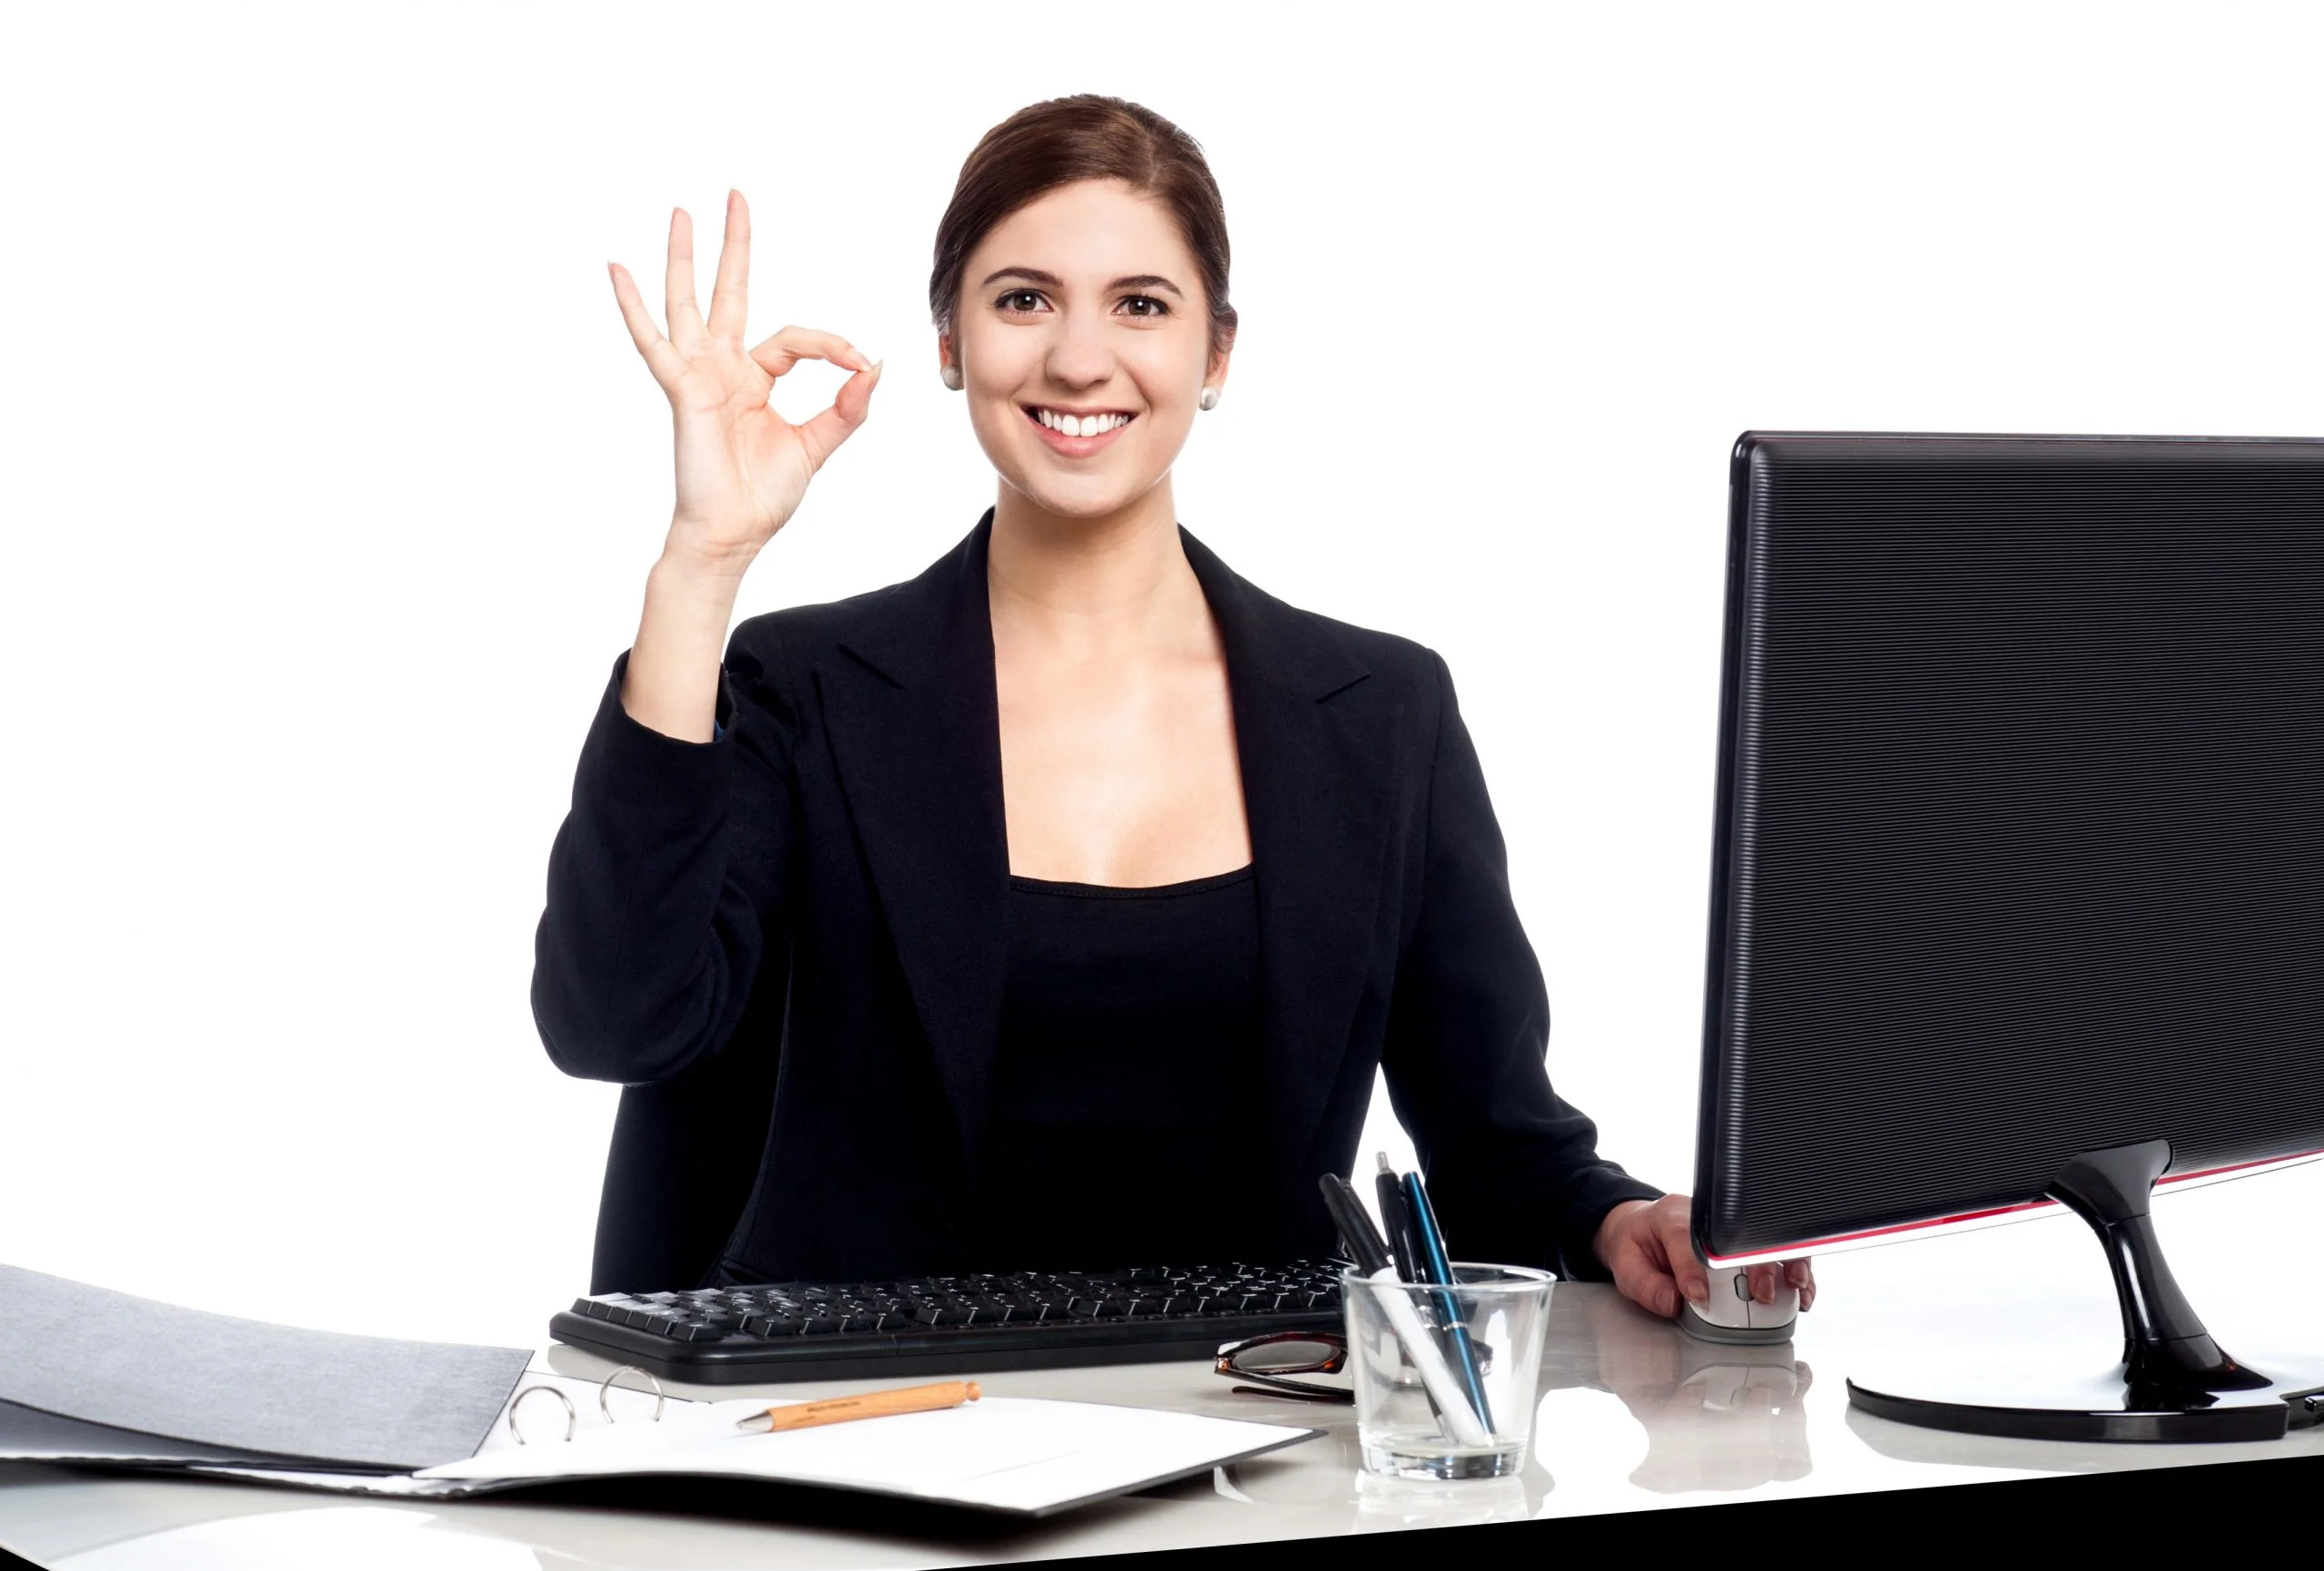 Smiling Woman on Computer